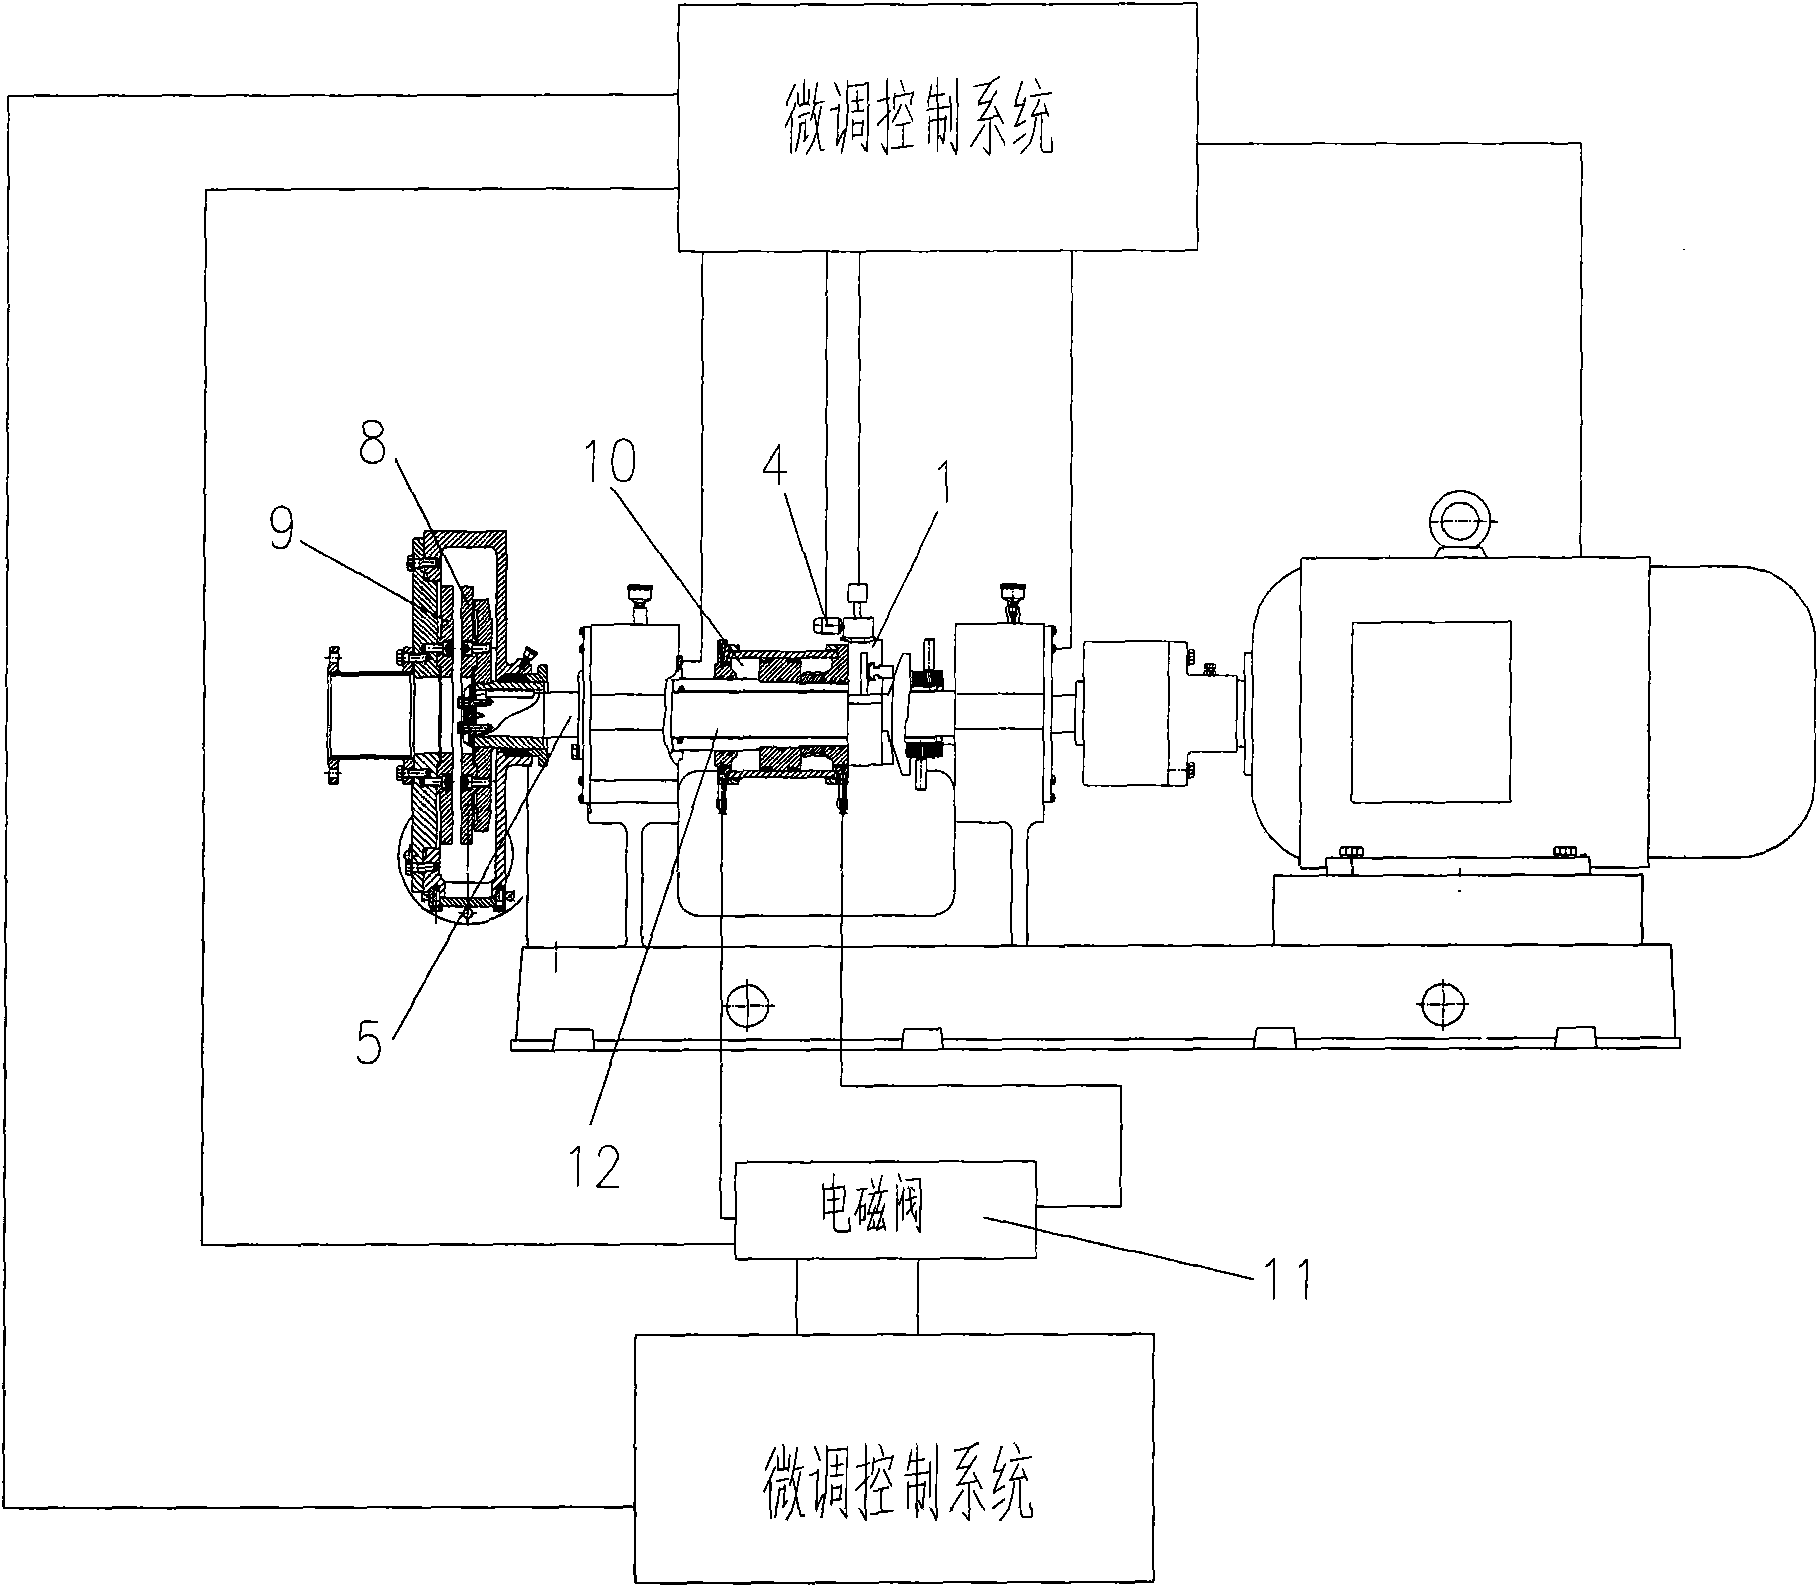 System and method for controlling medium consistency disc grinder in a fine tuning way